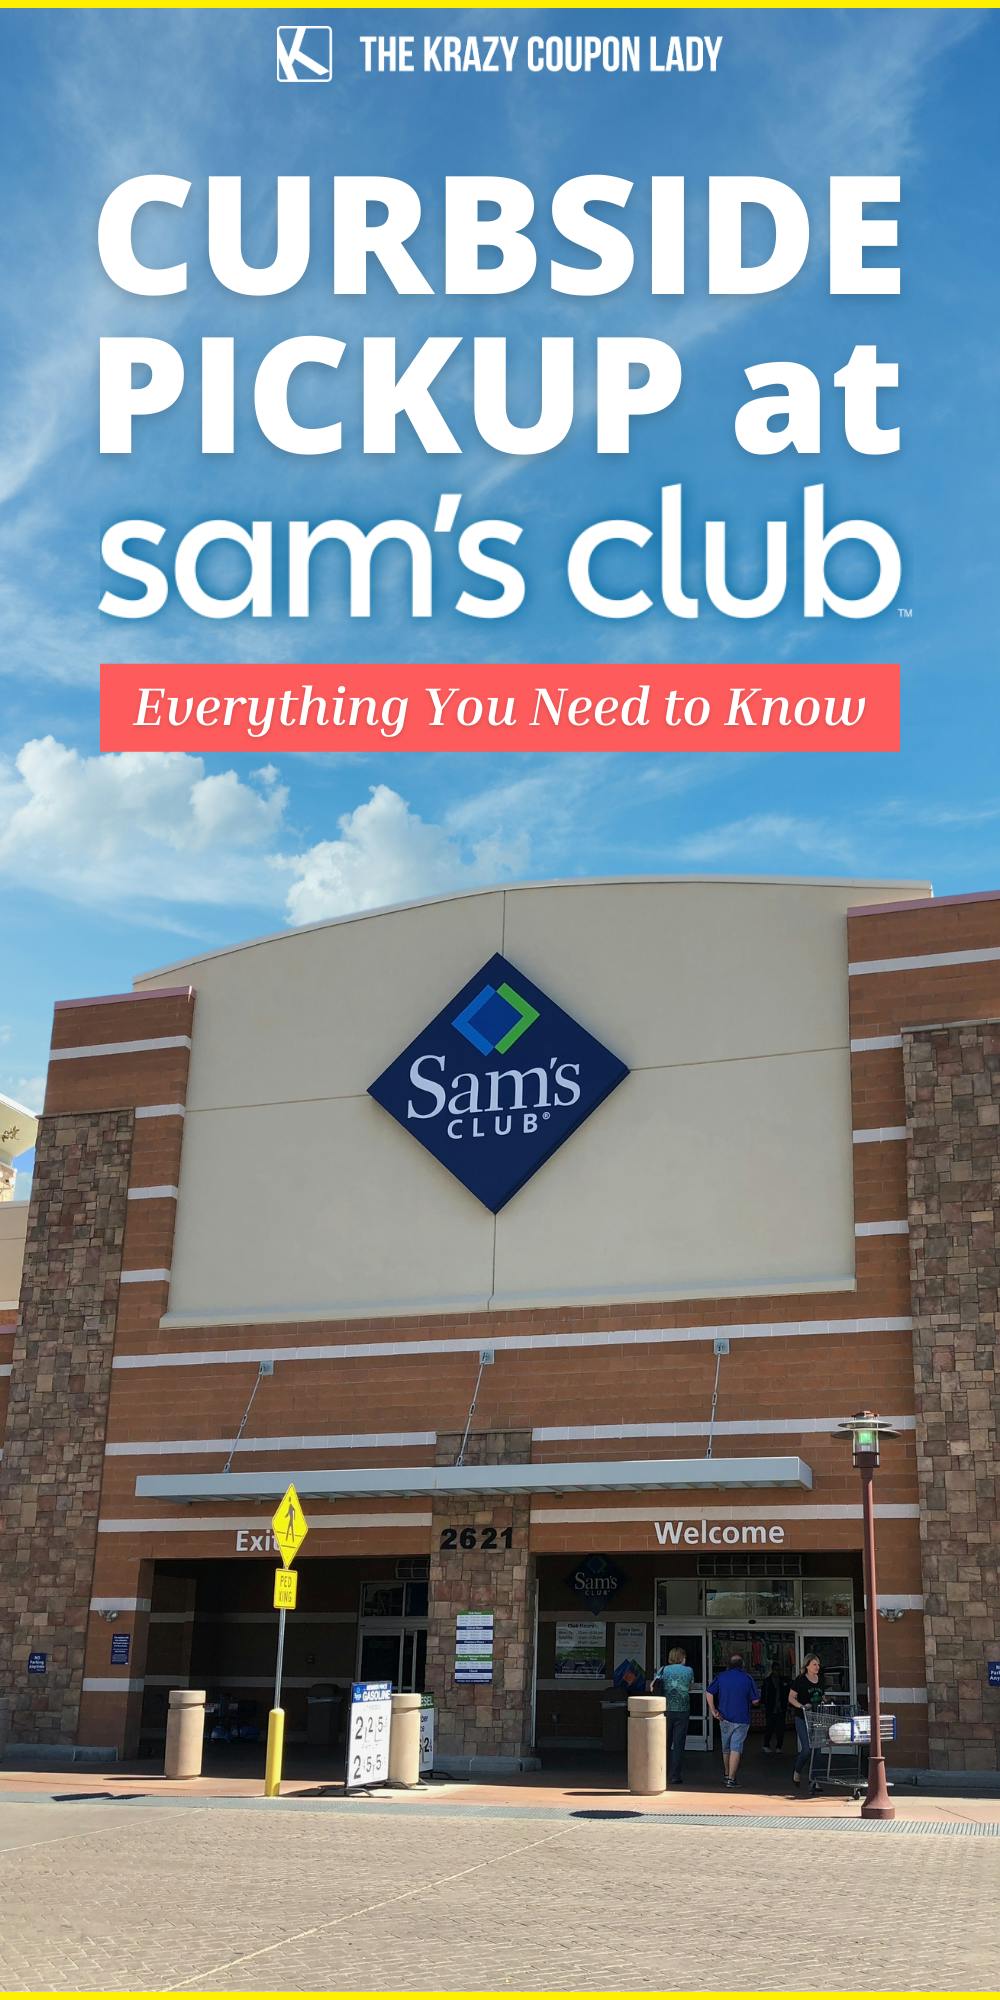 Sam's Club Curbside Pickup: Top Tips for Newbies - The Krazy Coupon Lady